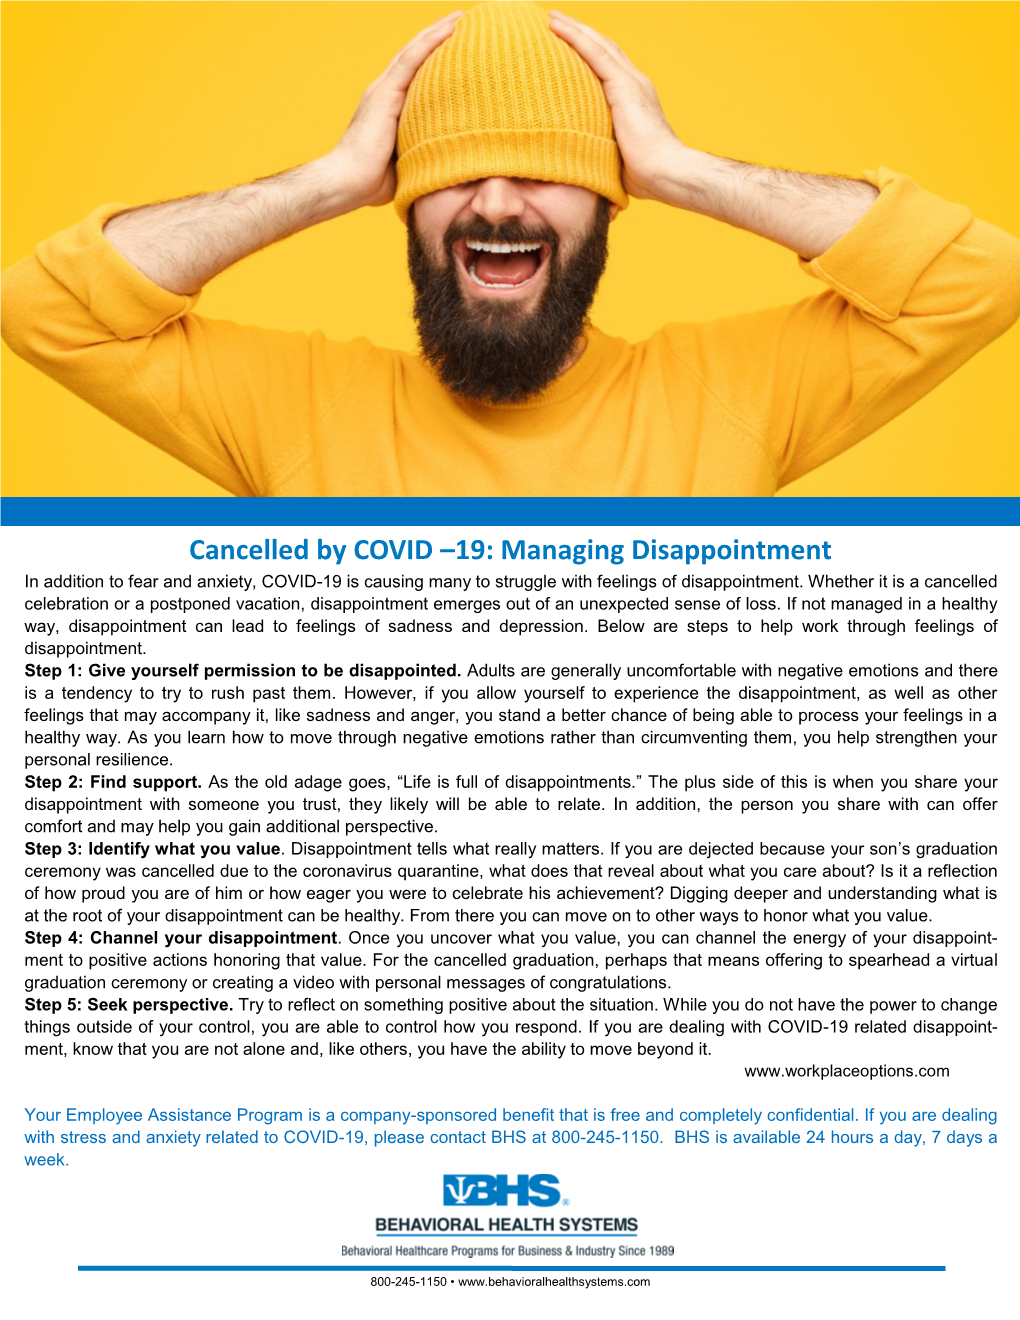 Cancelled by COVID –19: Managing Disappointment in Addition to Fear and Anxiety, COVID-19 Is Causing Many to Struggle with Feelings of Disappointment